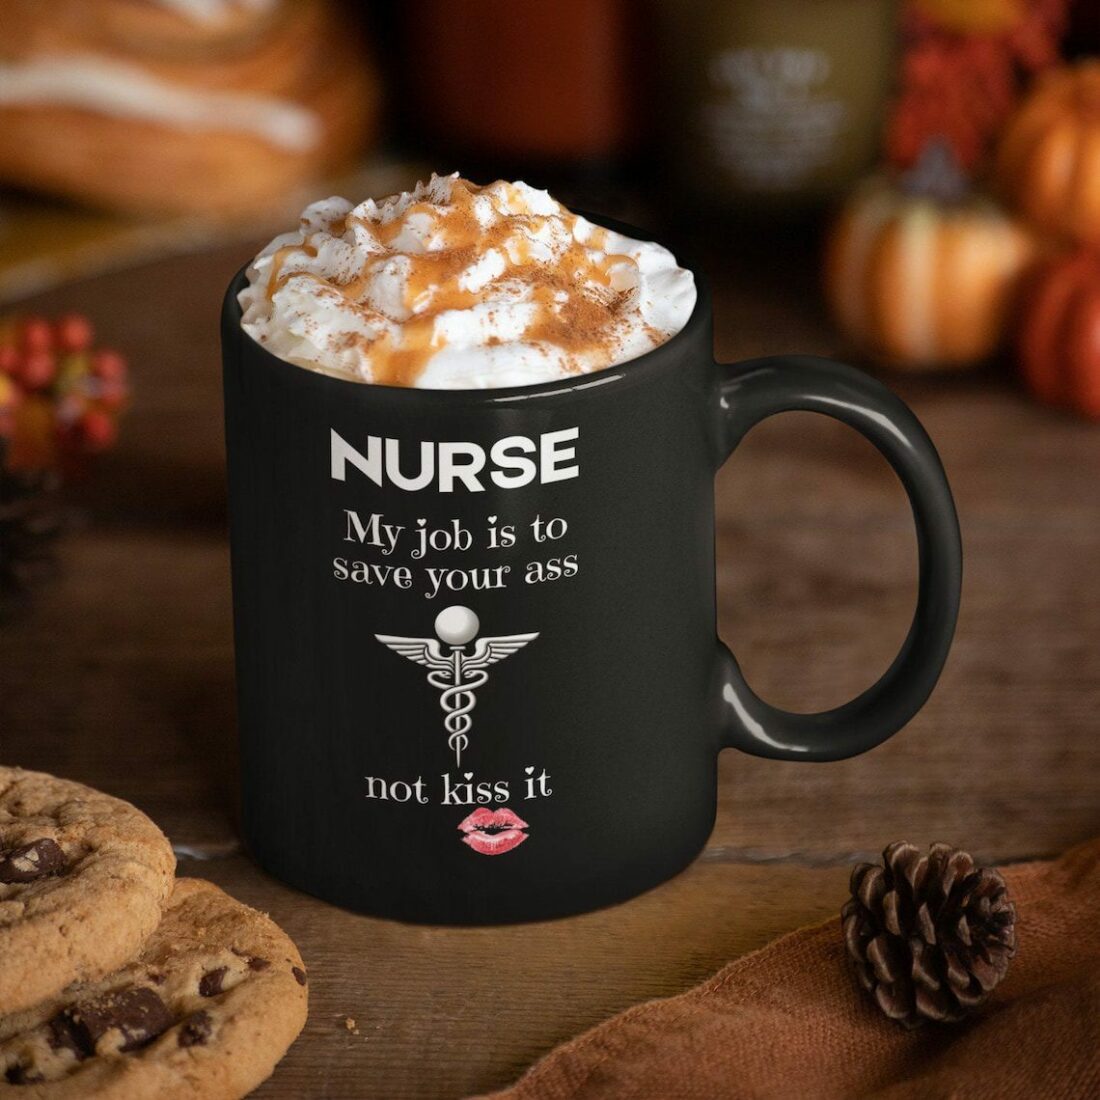 My job is to save your ass not kiss it| funny gift mug for nurse